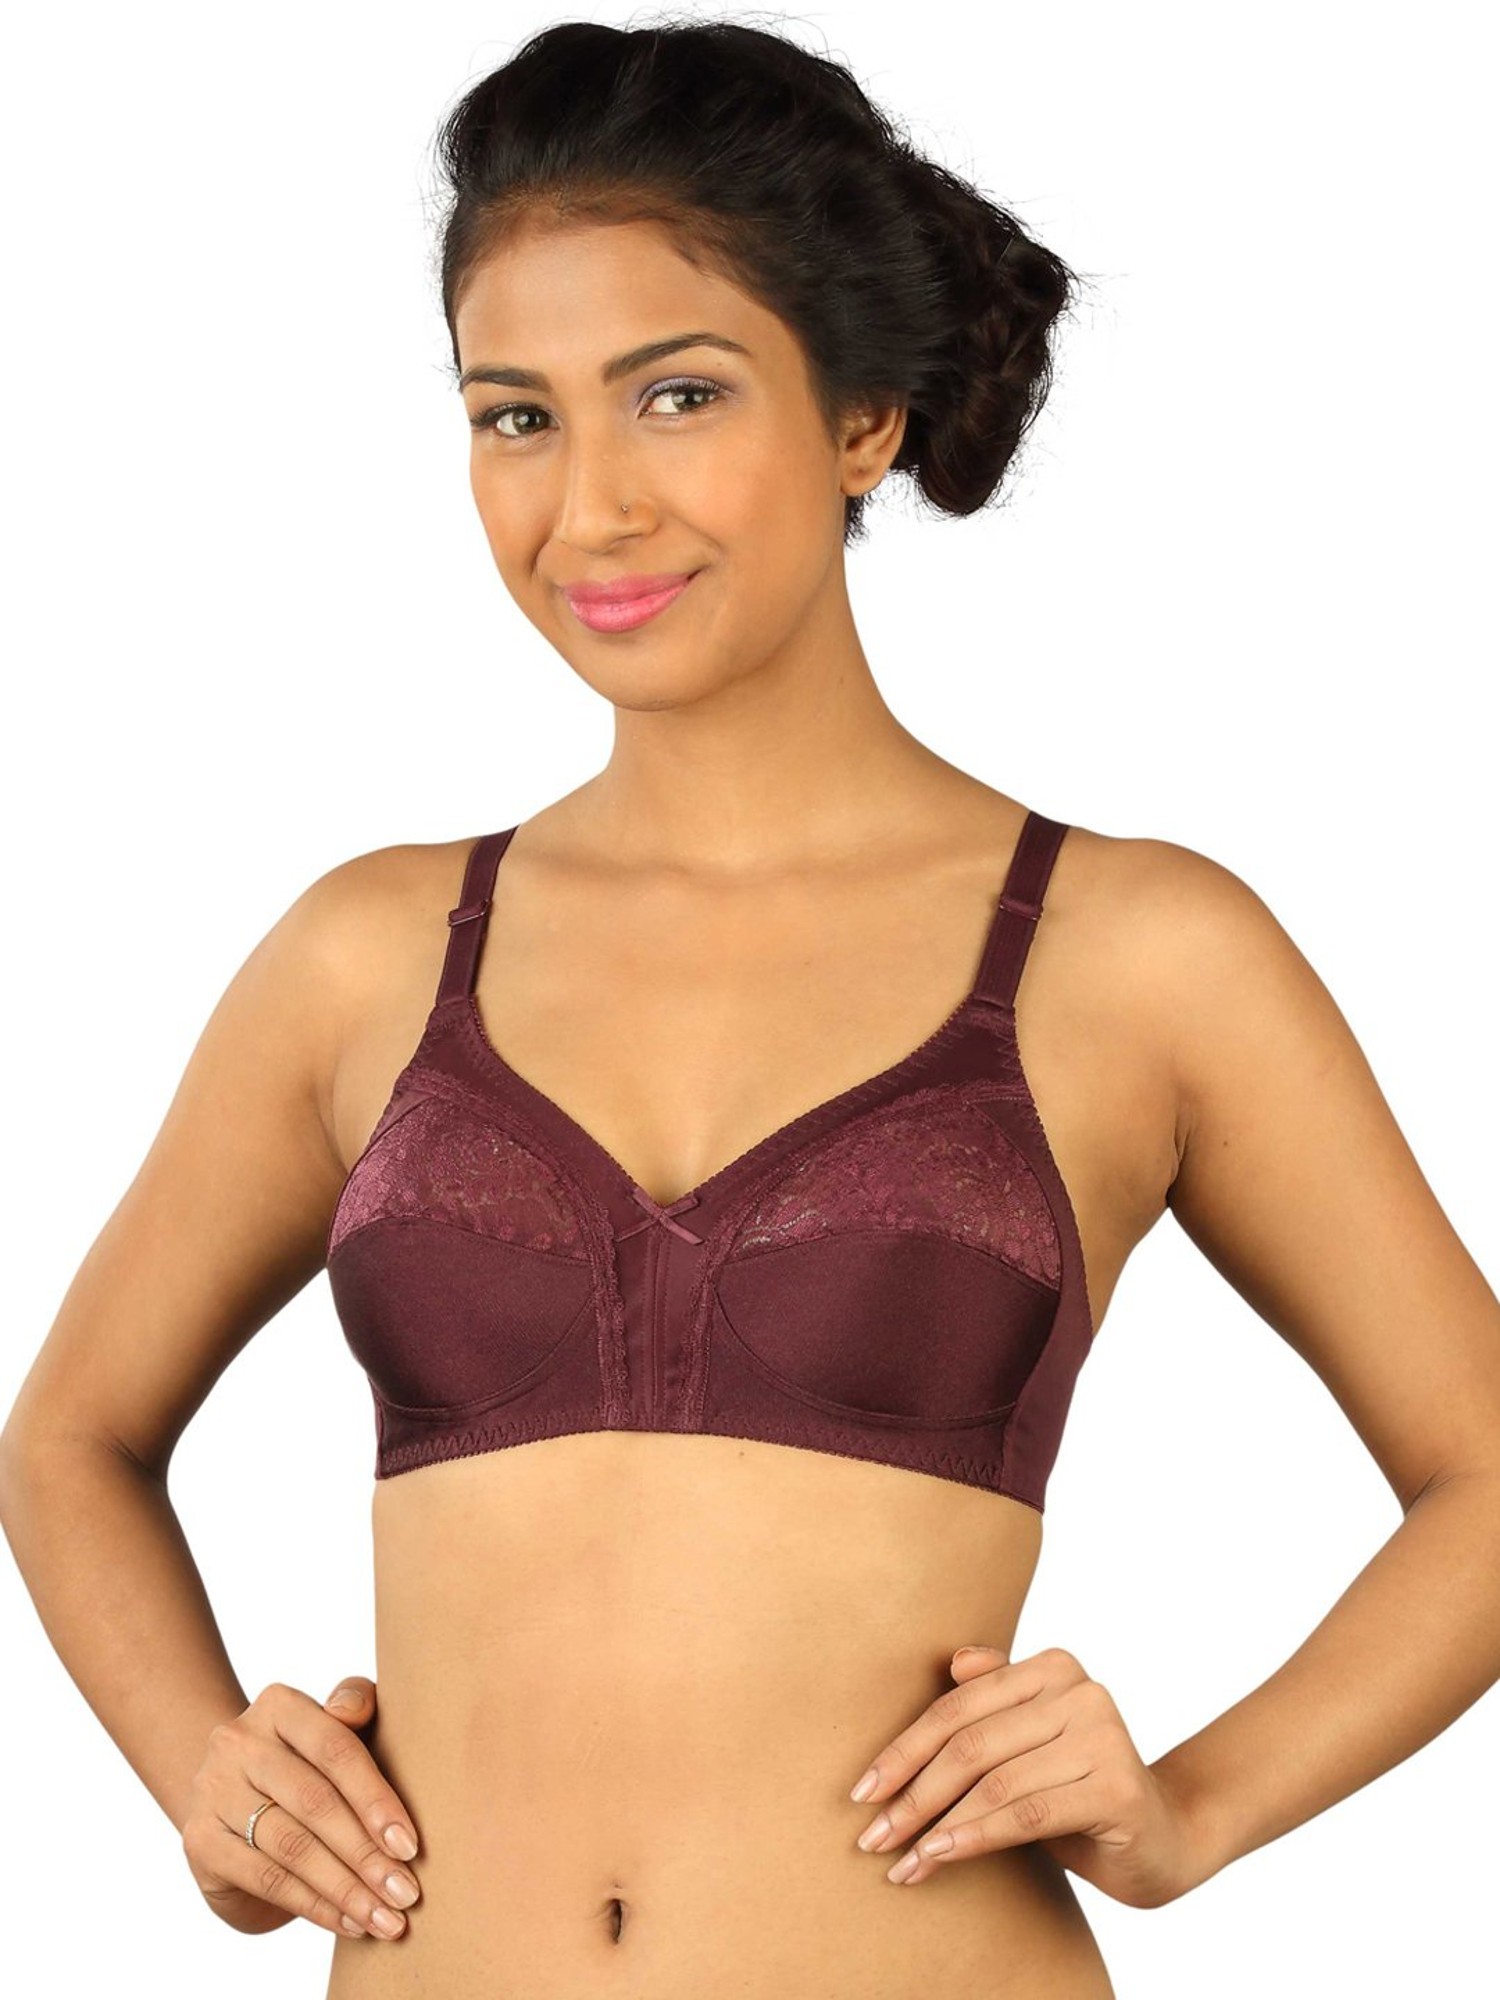 LEADWORT NORMAL BRA Women Full Coverage Non Padded Bra - Buy LEADWORT NORMAL  BRA Women Full Coverage Non Padded Bra Online at Best Prices in India